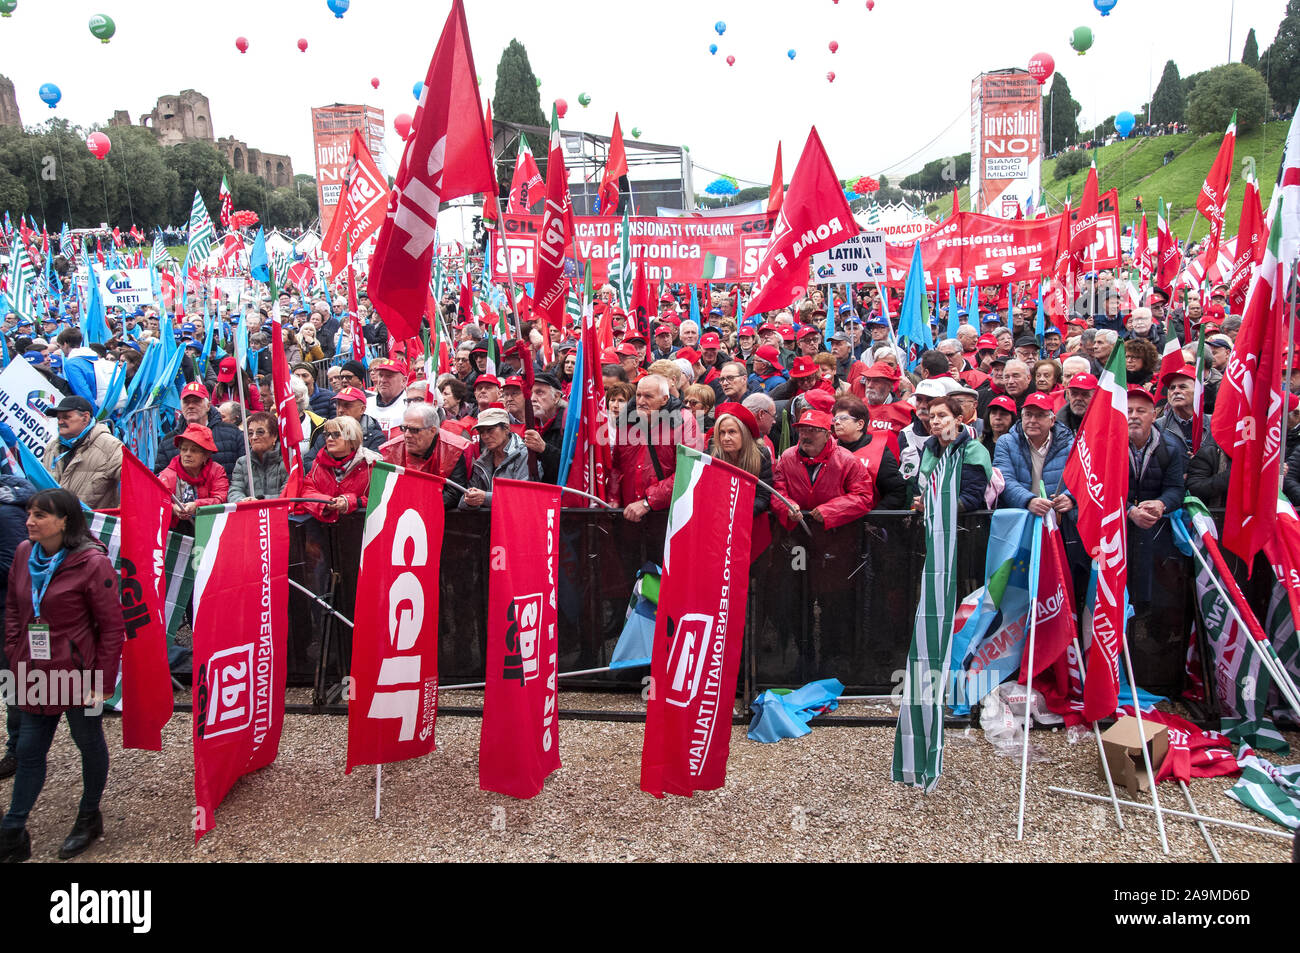 Rome, Italy. 16th Nov, 2019. National demonstration of pensioners Spi-Cgil, Fnp-Cisl and Uilp-Uil with the slogan 'Invisible no! We are sixteen million' at the Circus Maximus in Rome. (Photo by Patrizia Cortellessa/Pacific Press) Credit: Pacific Press Agency/Alamy Live News Stock Photo